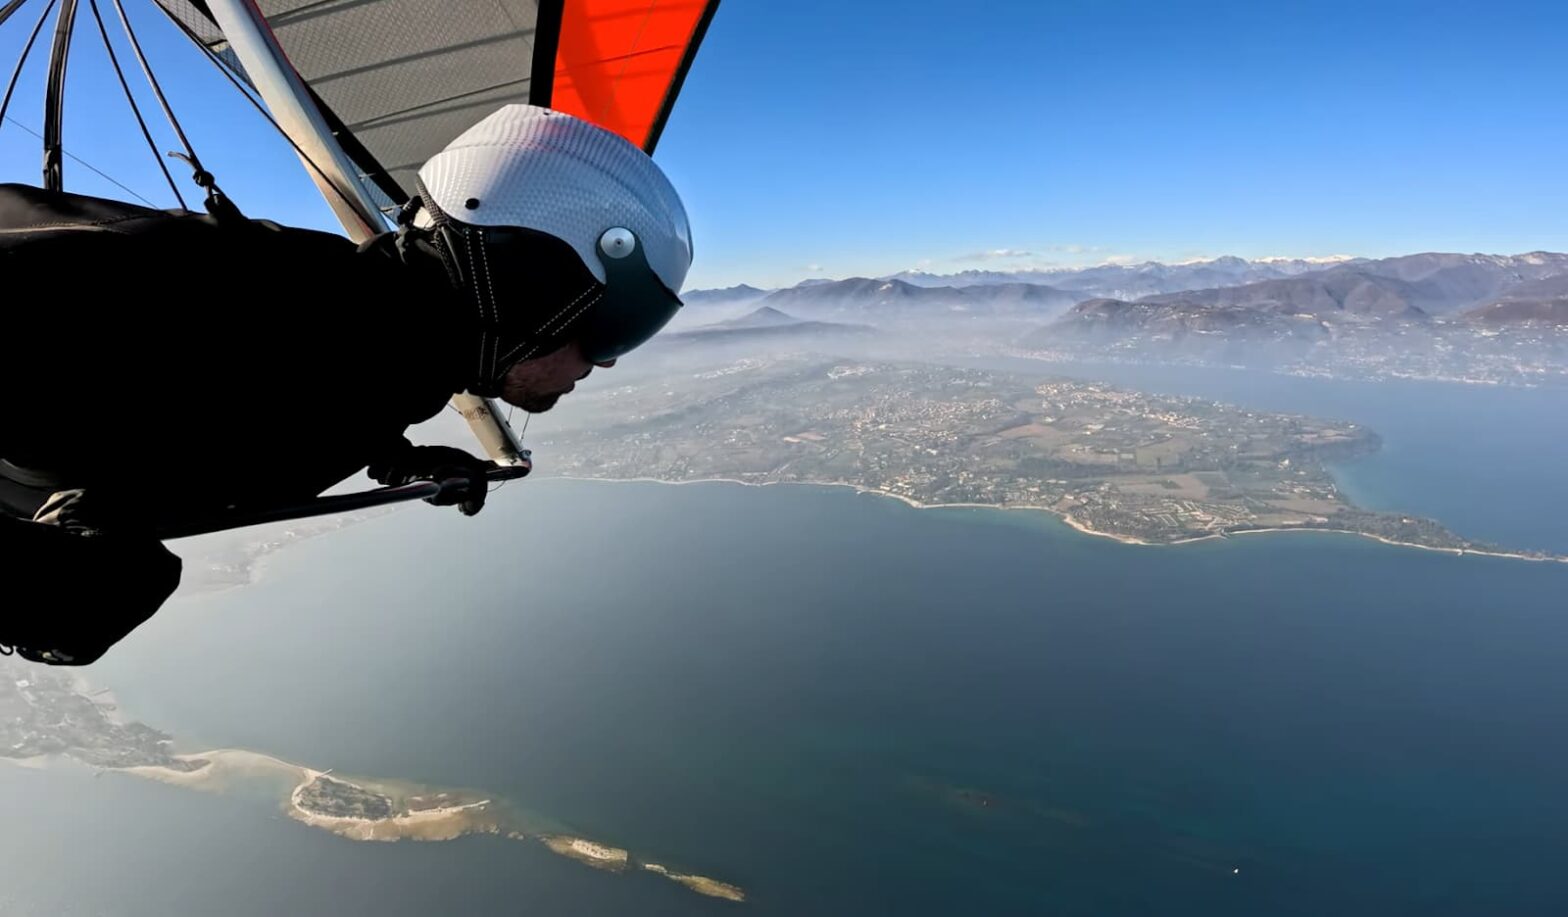 Hang glider flying high above a coastline with mountain views